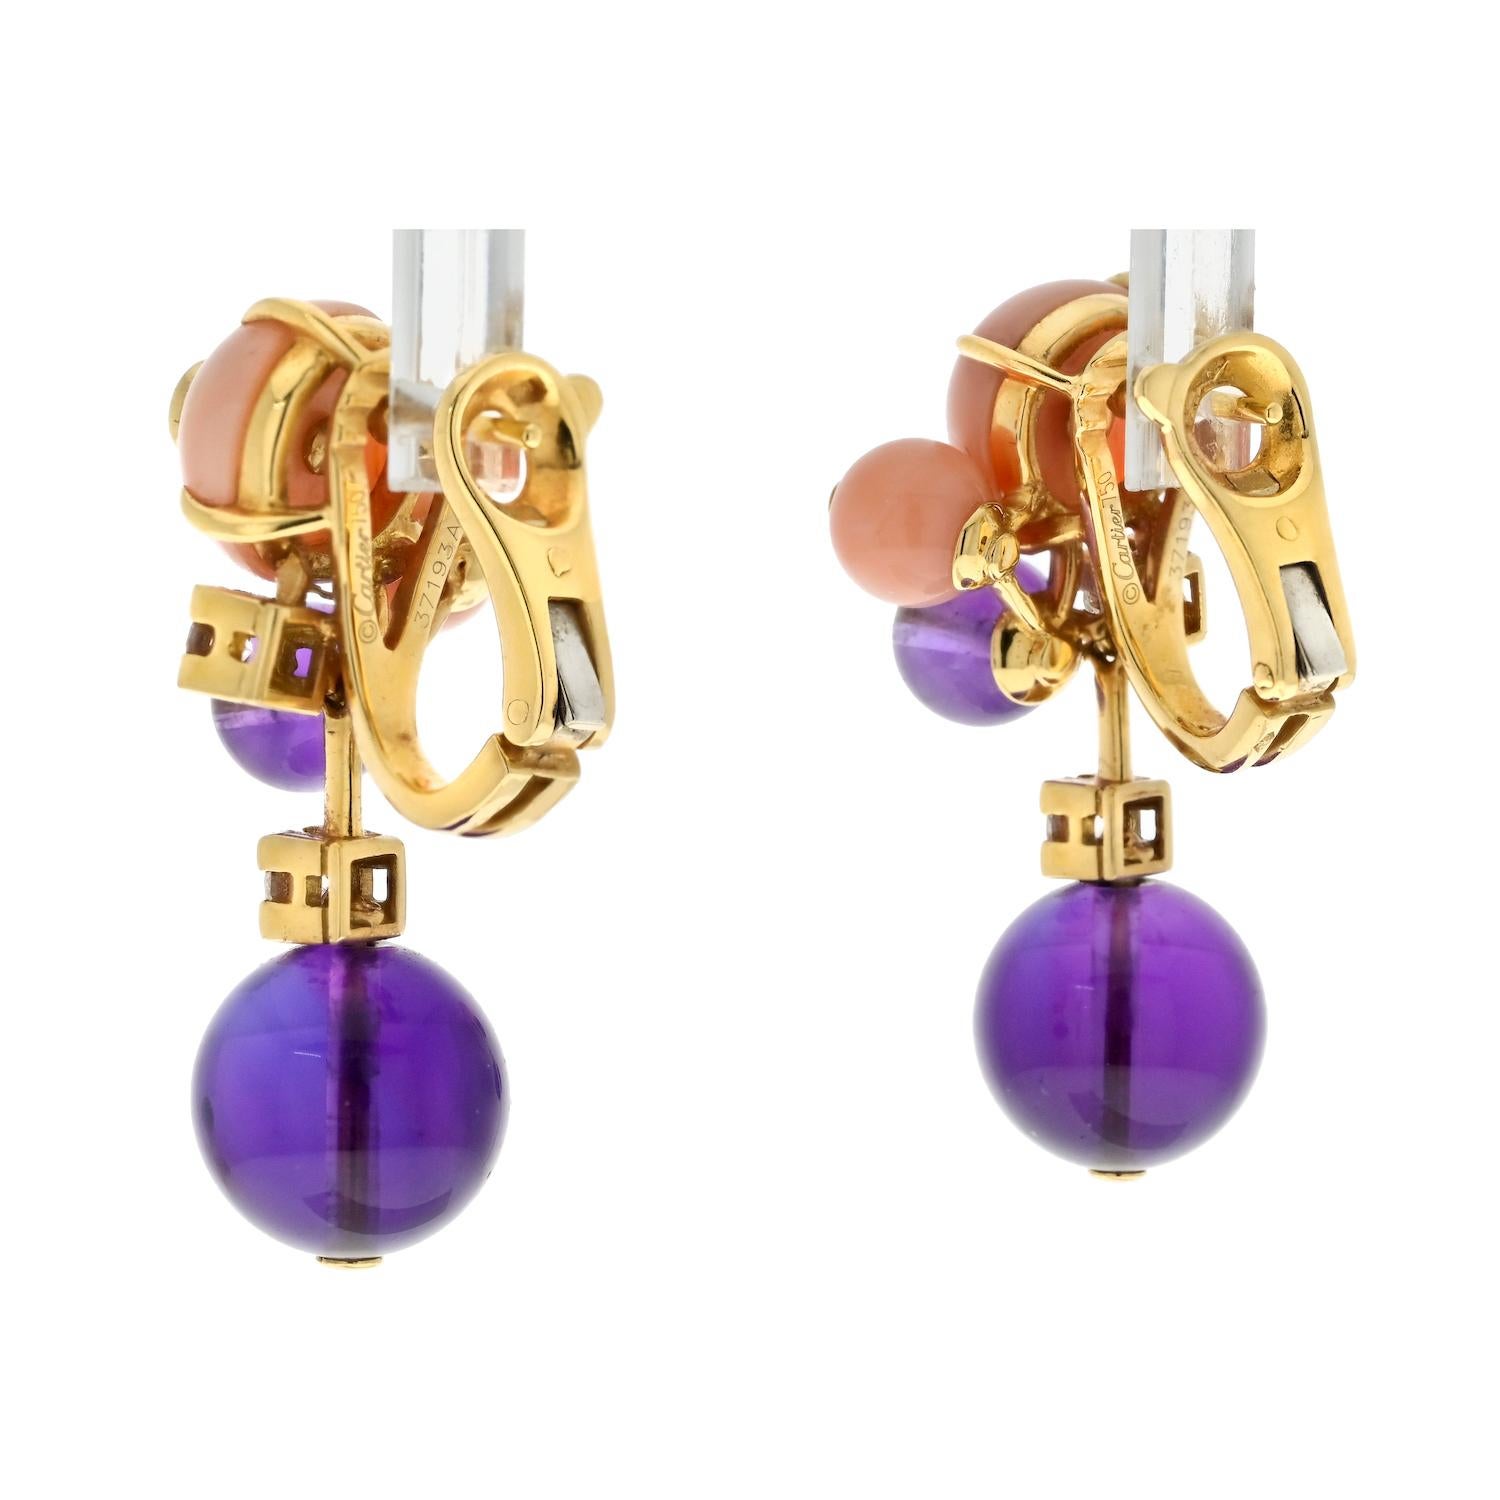 Modern Cartier Delices De Goa 18K Yellow Gold Diamond, Coral And Amethyst Earrings For Sale